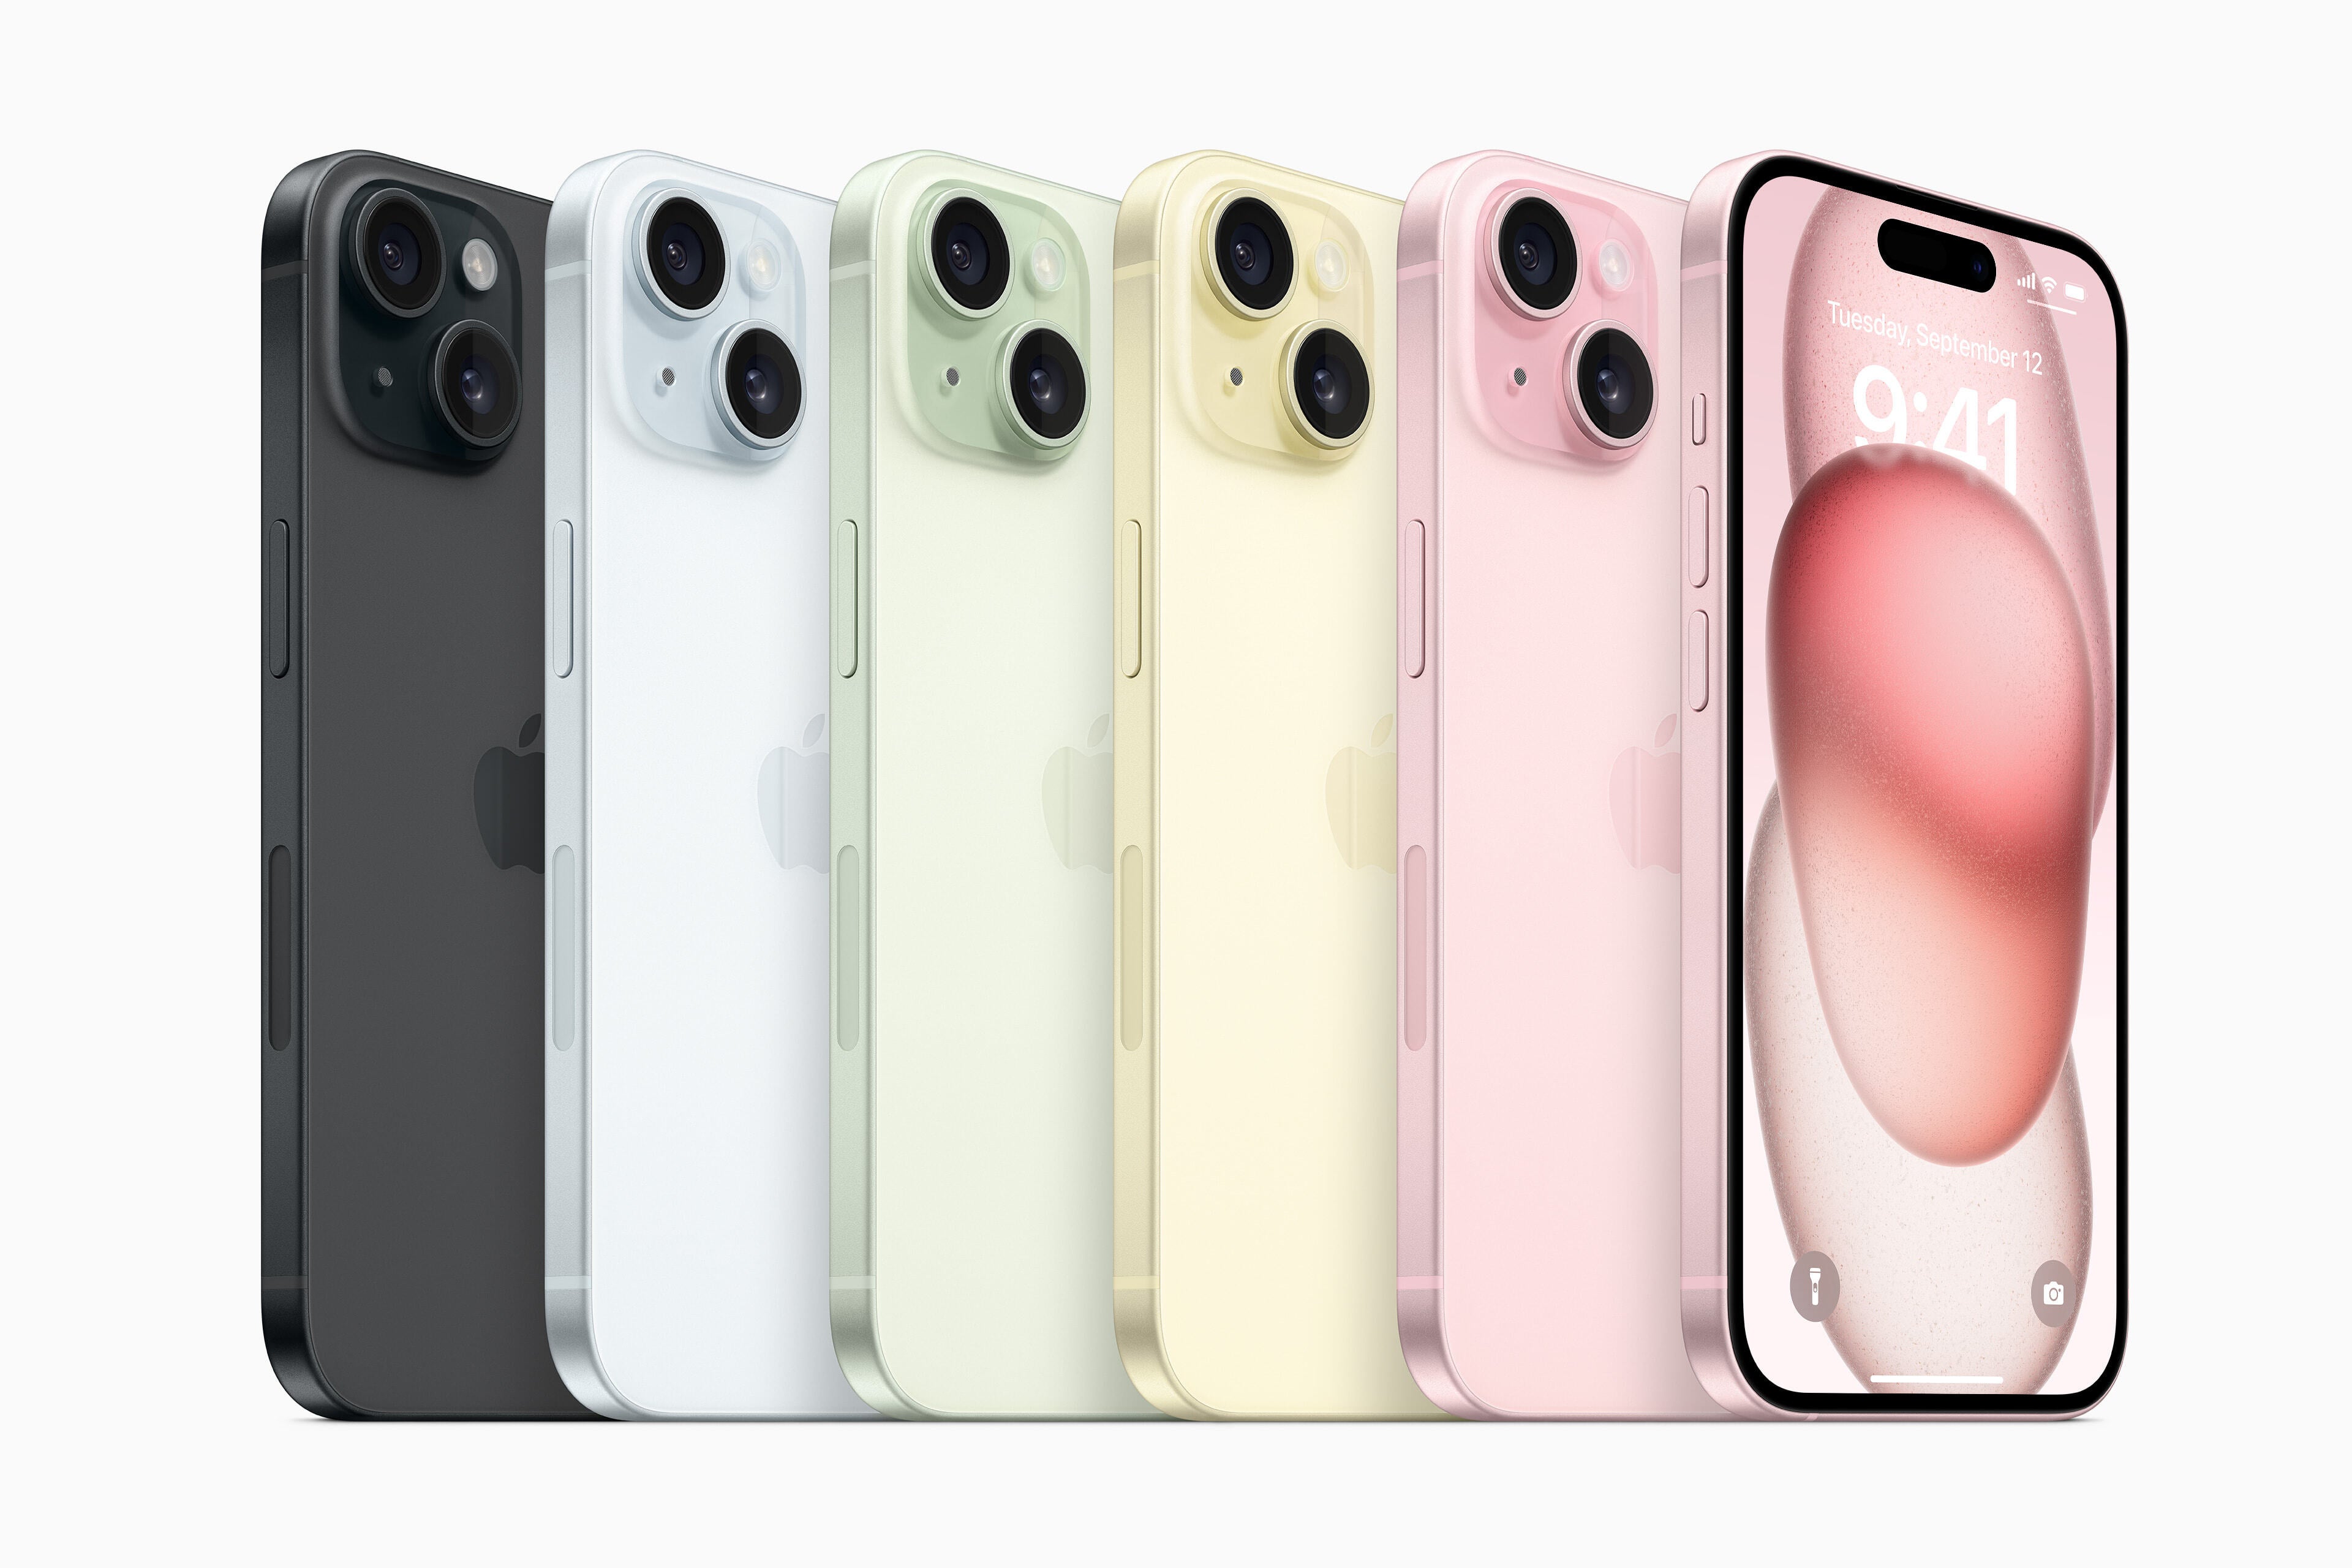 iPhone 15 and 15 Plus color options - black, blue, green, yellow, pink (from left to right) - Apple iPhone 15 release date, price, and features